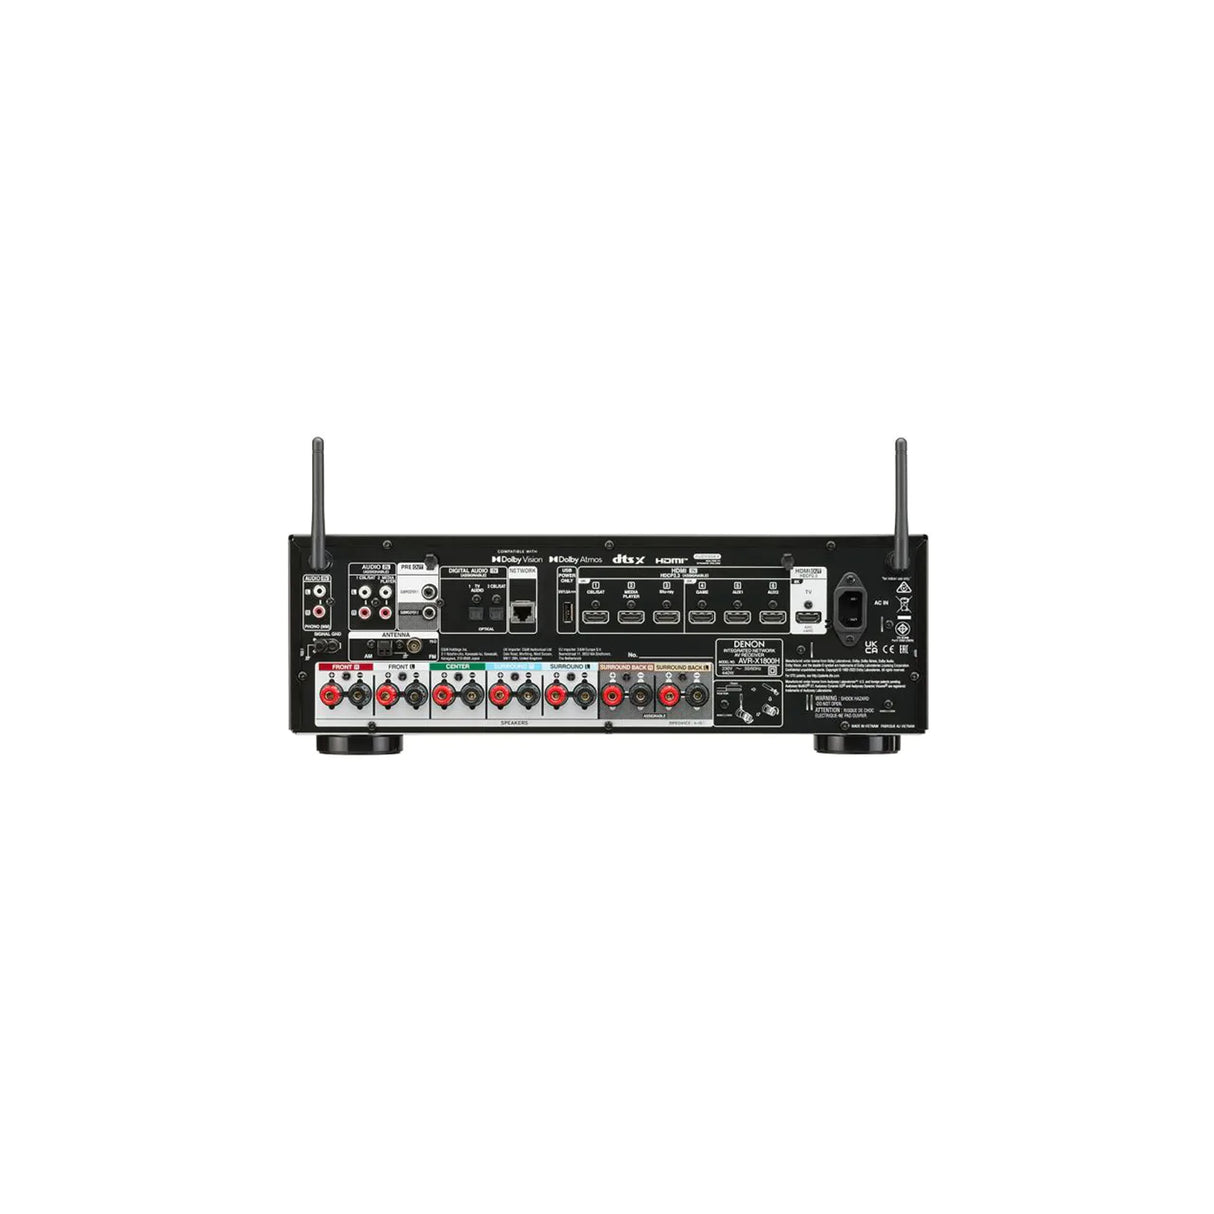 Denon AVR-X1800H - 7.2 Channel AV Receiver with Yamaha NS-P41 5.1 Speaker Package (Bundle Package)